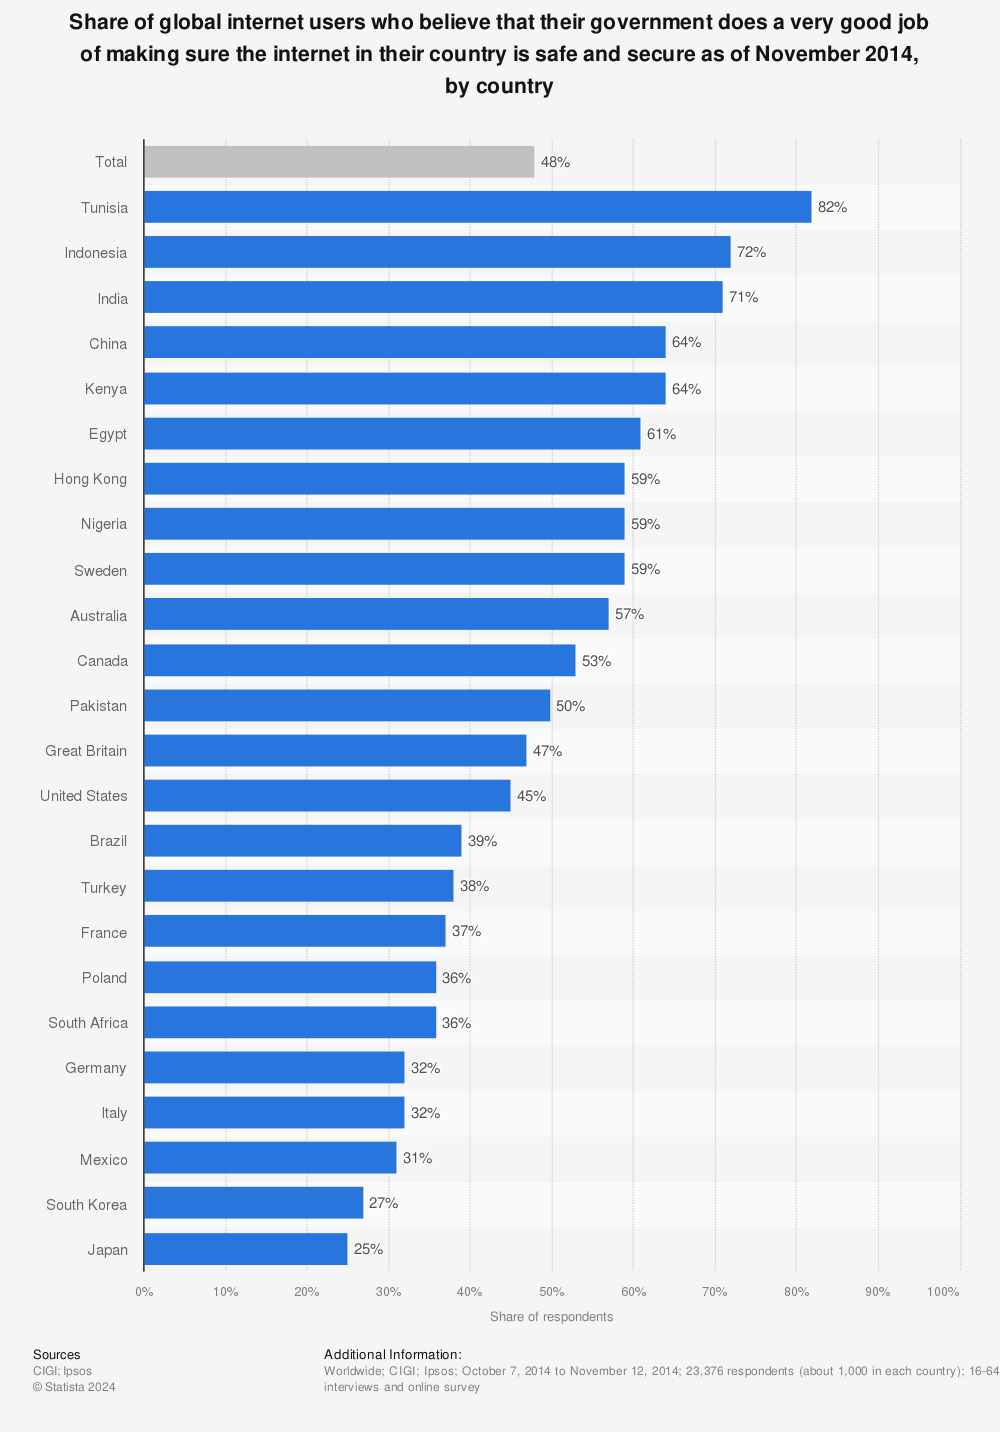 Statistic: Share of global internet users who believe that their government does a very good job of making sure the internet in their country is safe and secure as of November 2014, by country | Statista